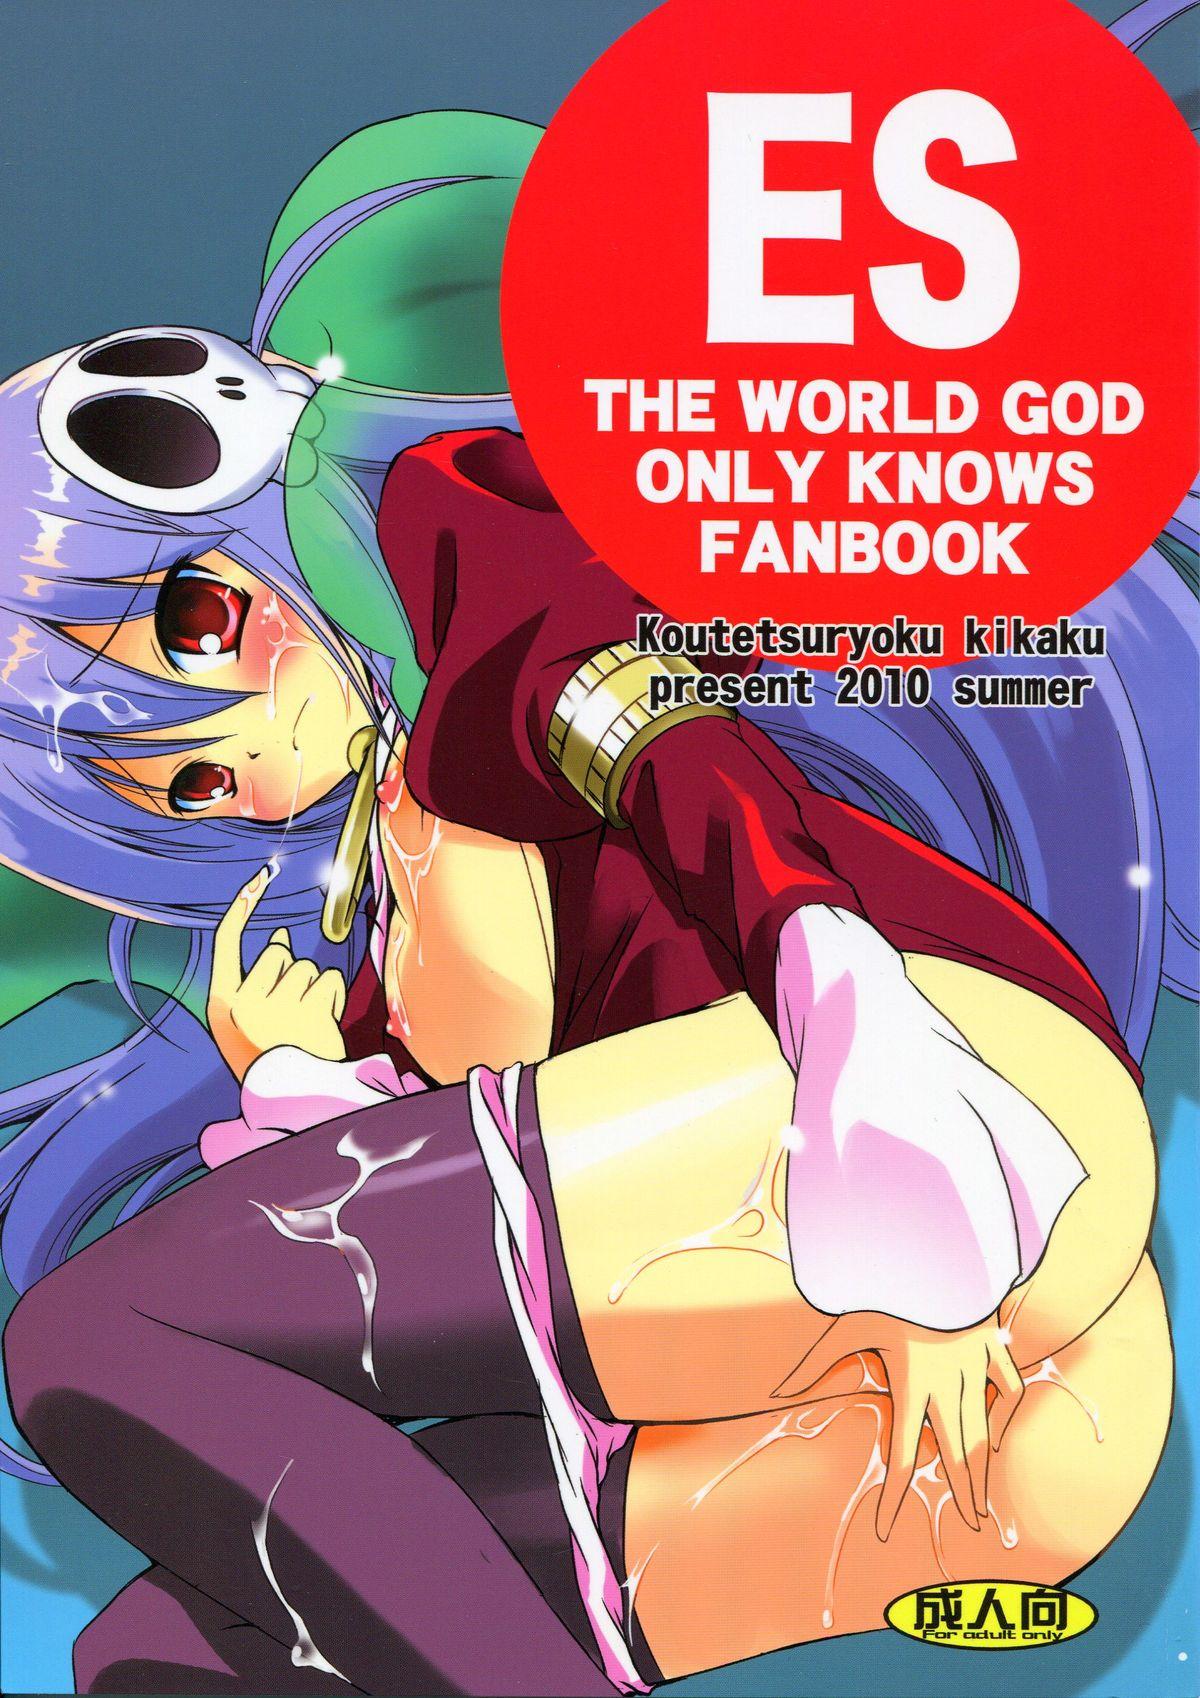 Hard Core Free Porn ES - The world god only knows Street - Page 1